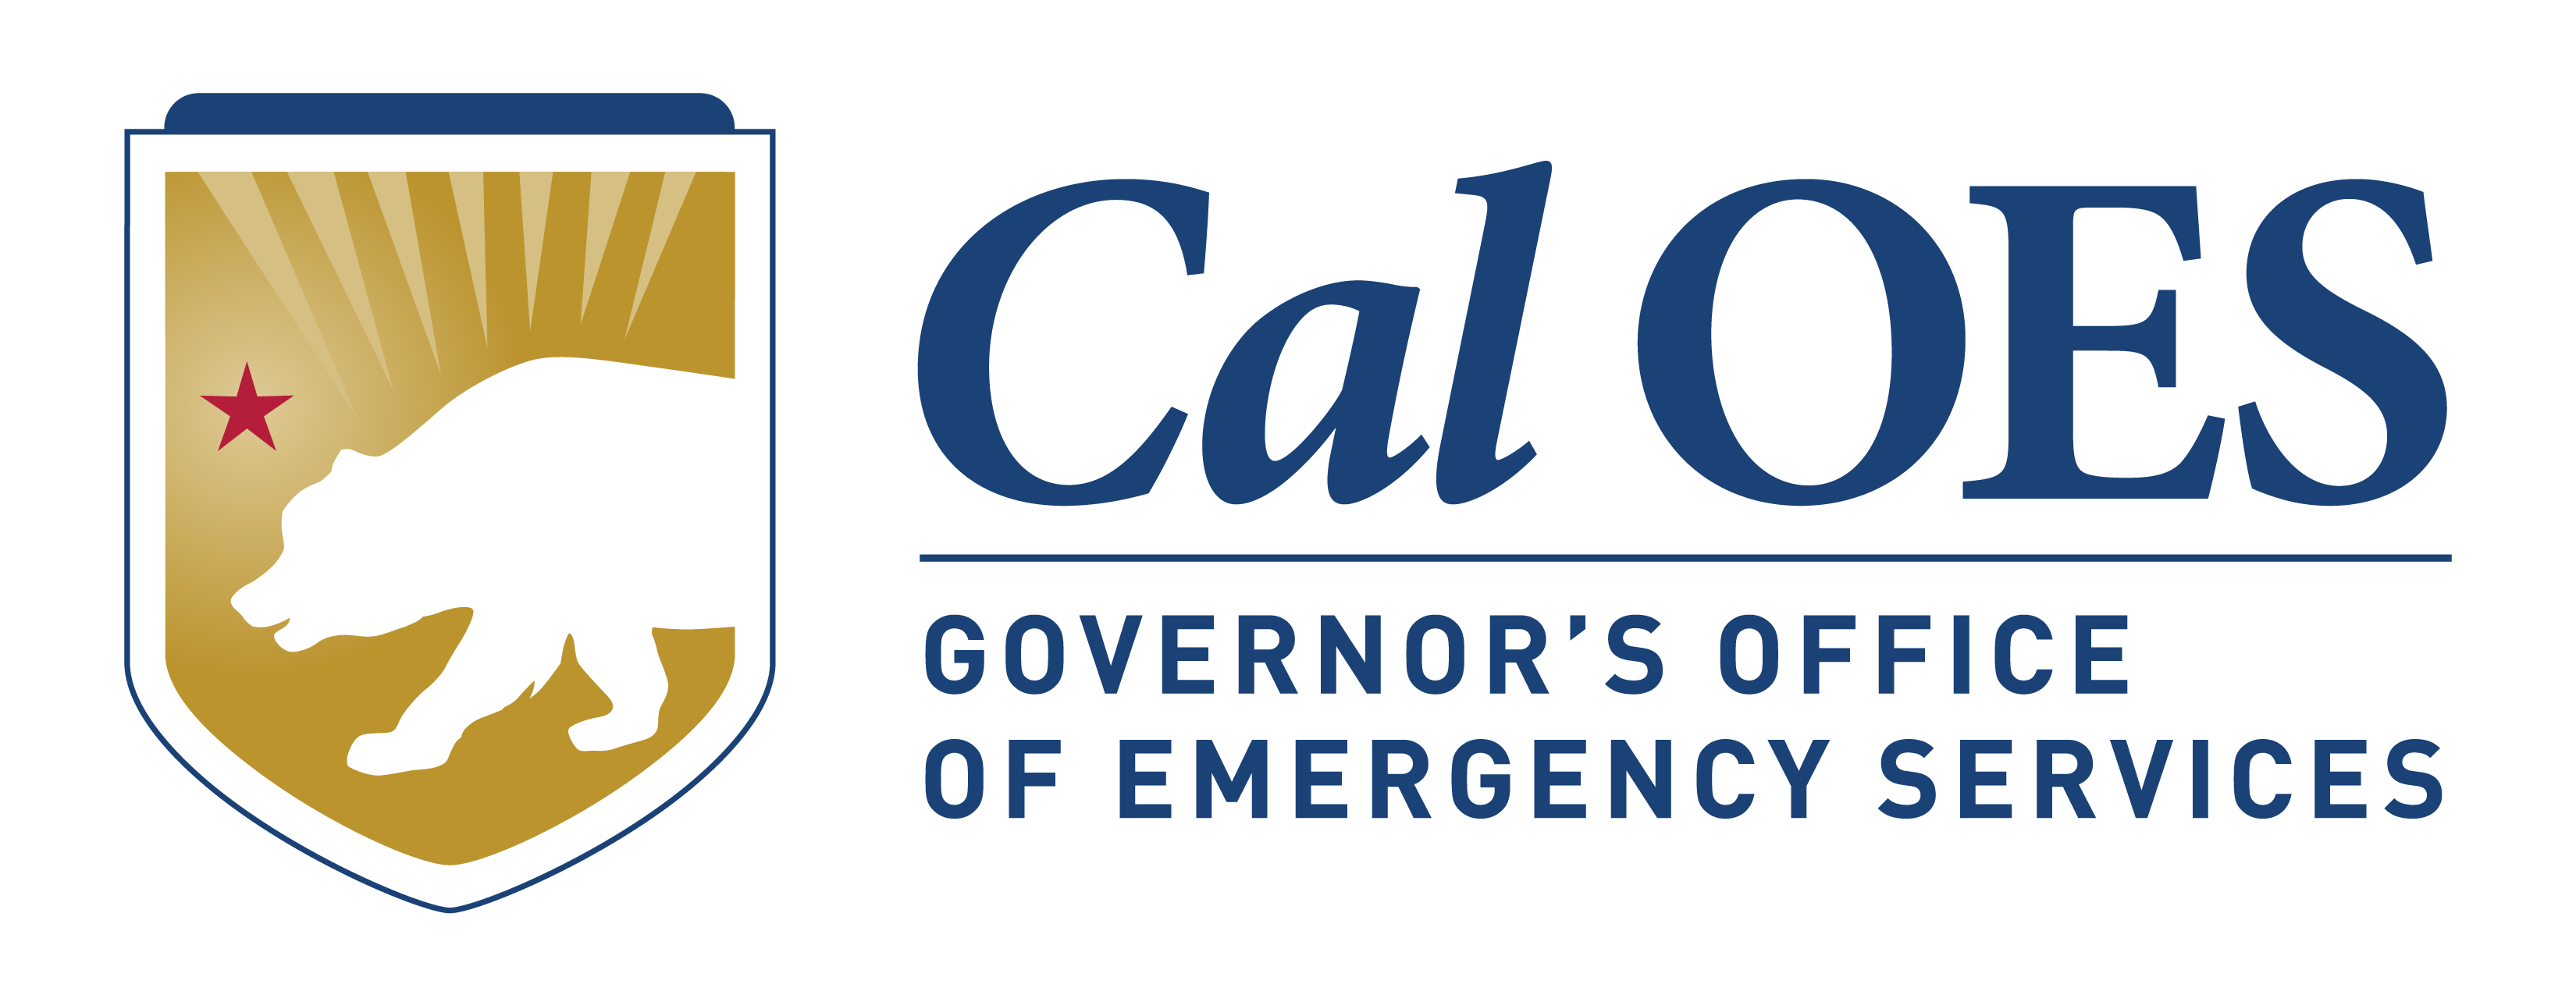 California Statewide Wildfire Recovery Resources Logo